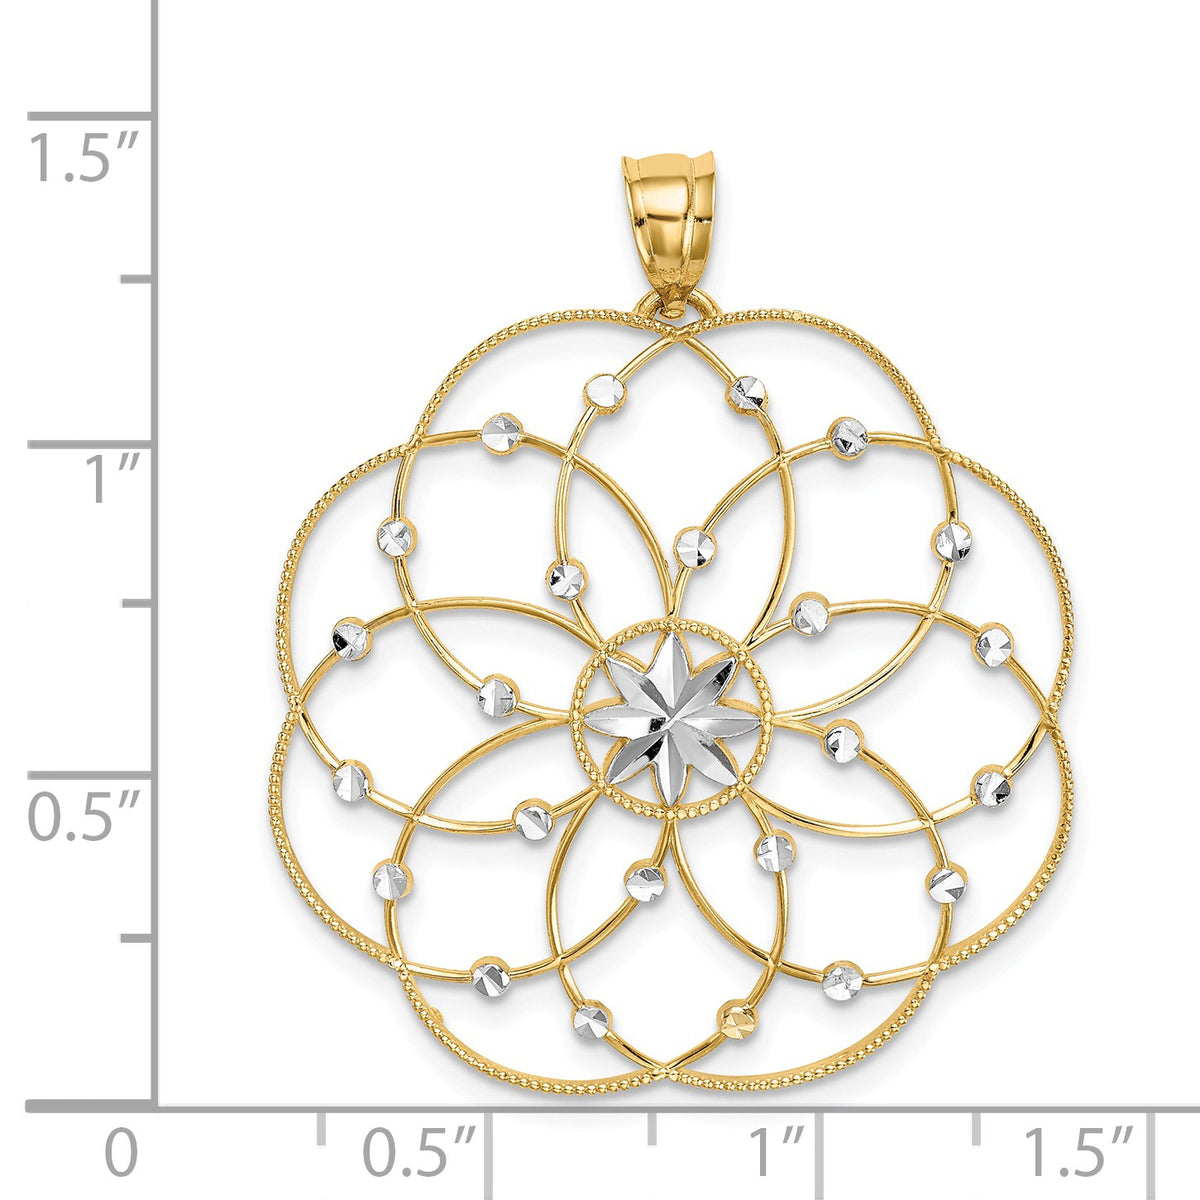 Alternate view of the 14k Yellow Gold &amp; White Rhodium Spiral Circle Pendant, 32mm (1 1/4 in) by The Black Bow Jewelry Co.